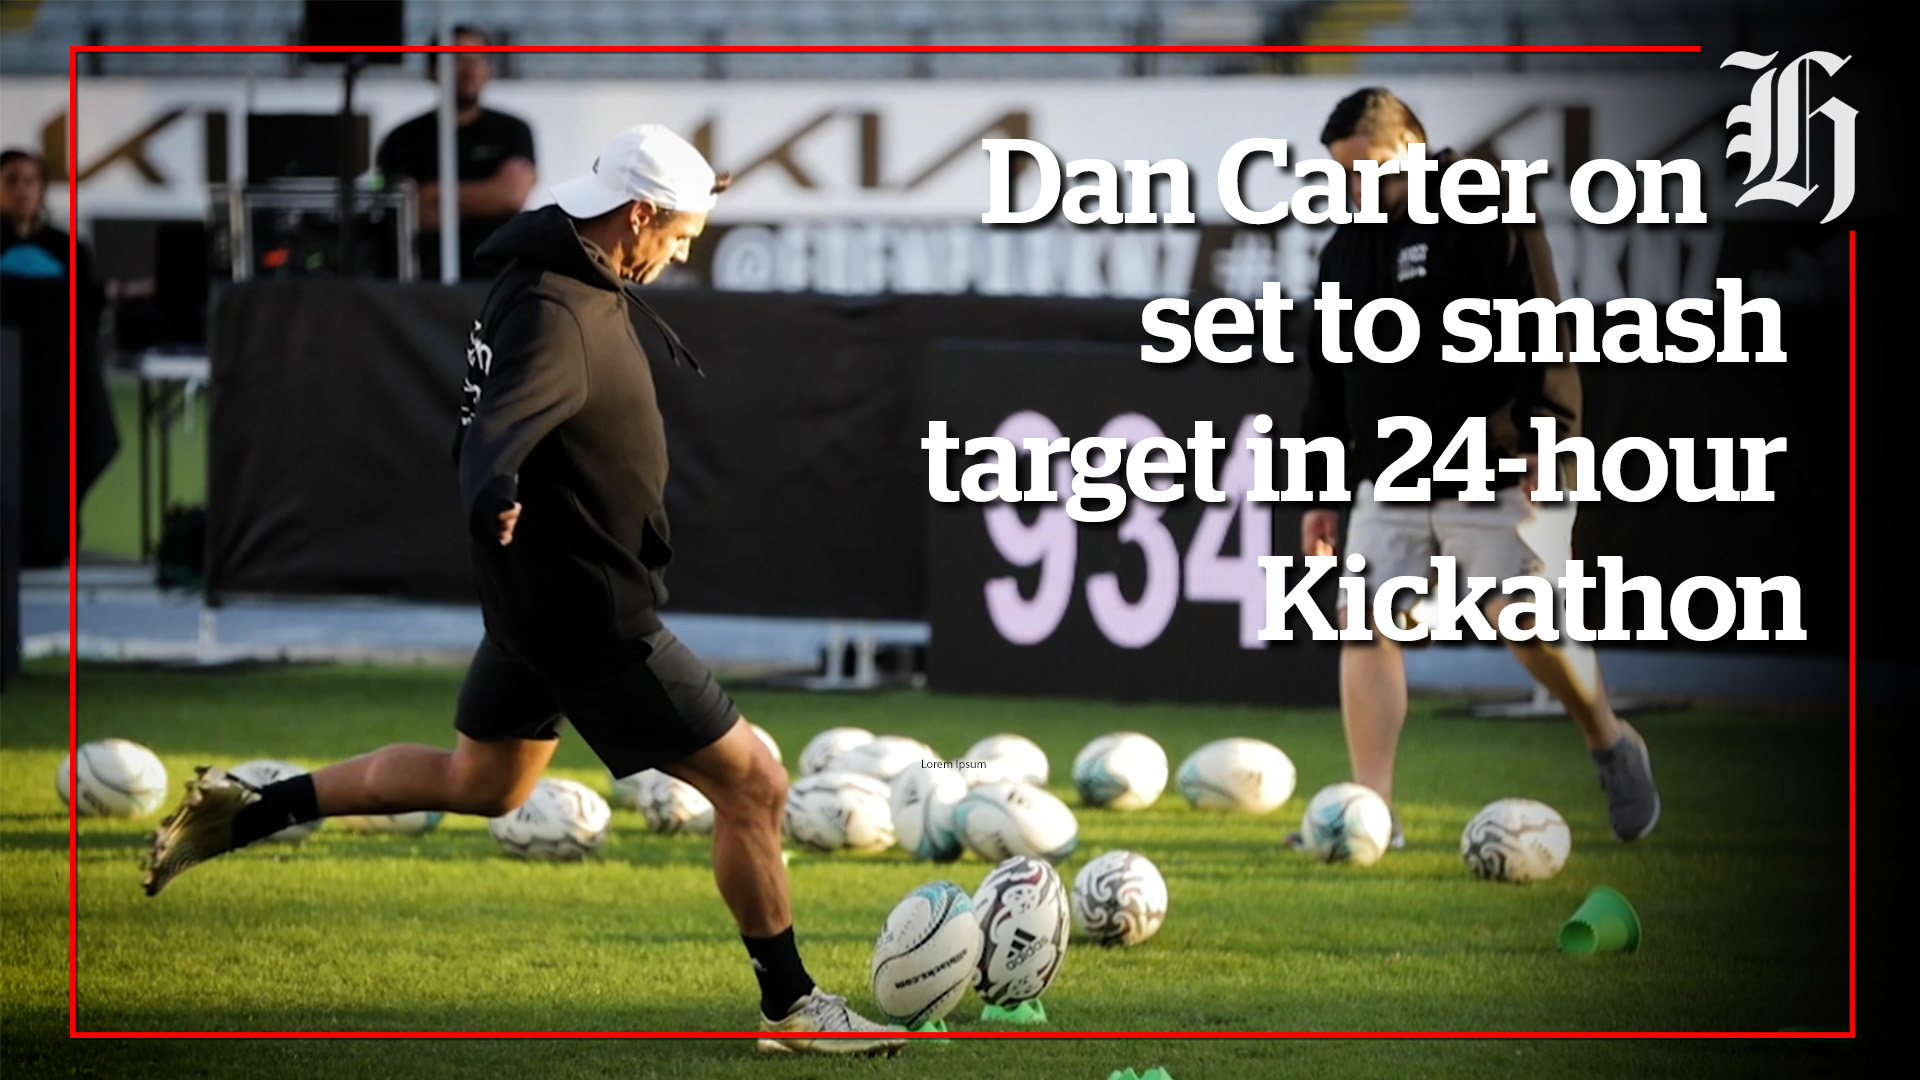 Kick off with Dan Carter! The famous rugby player joins the TAG